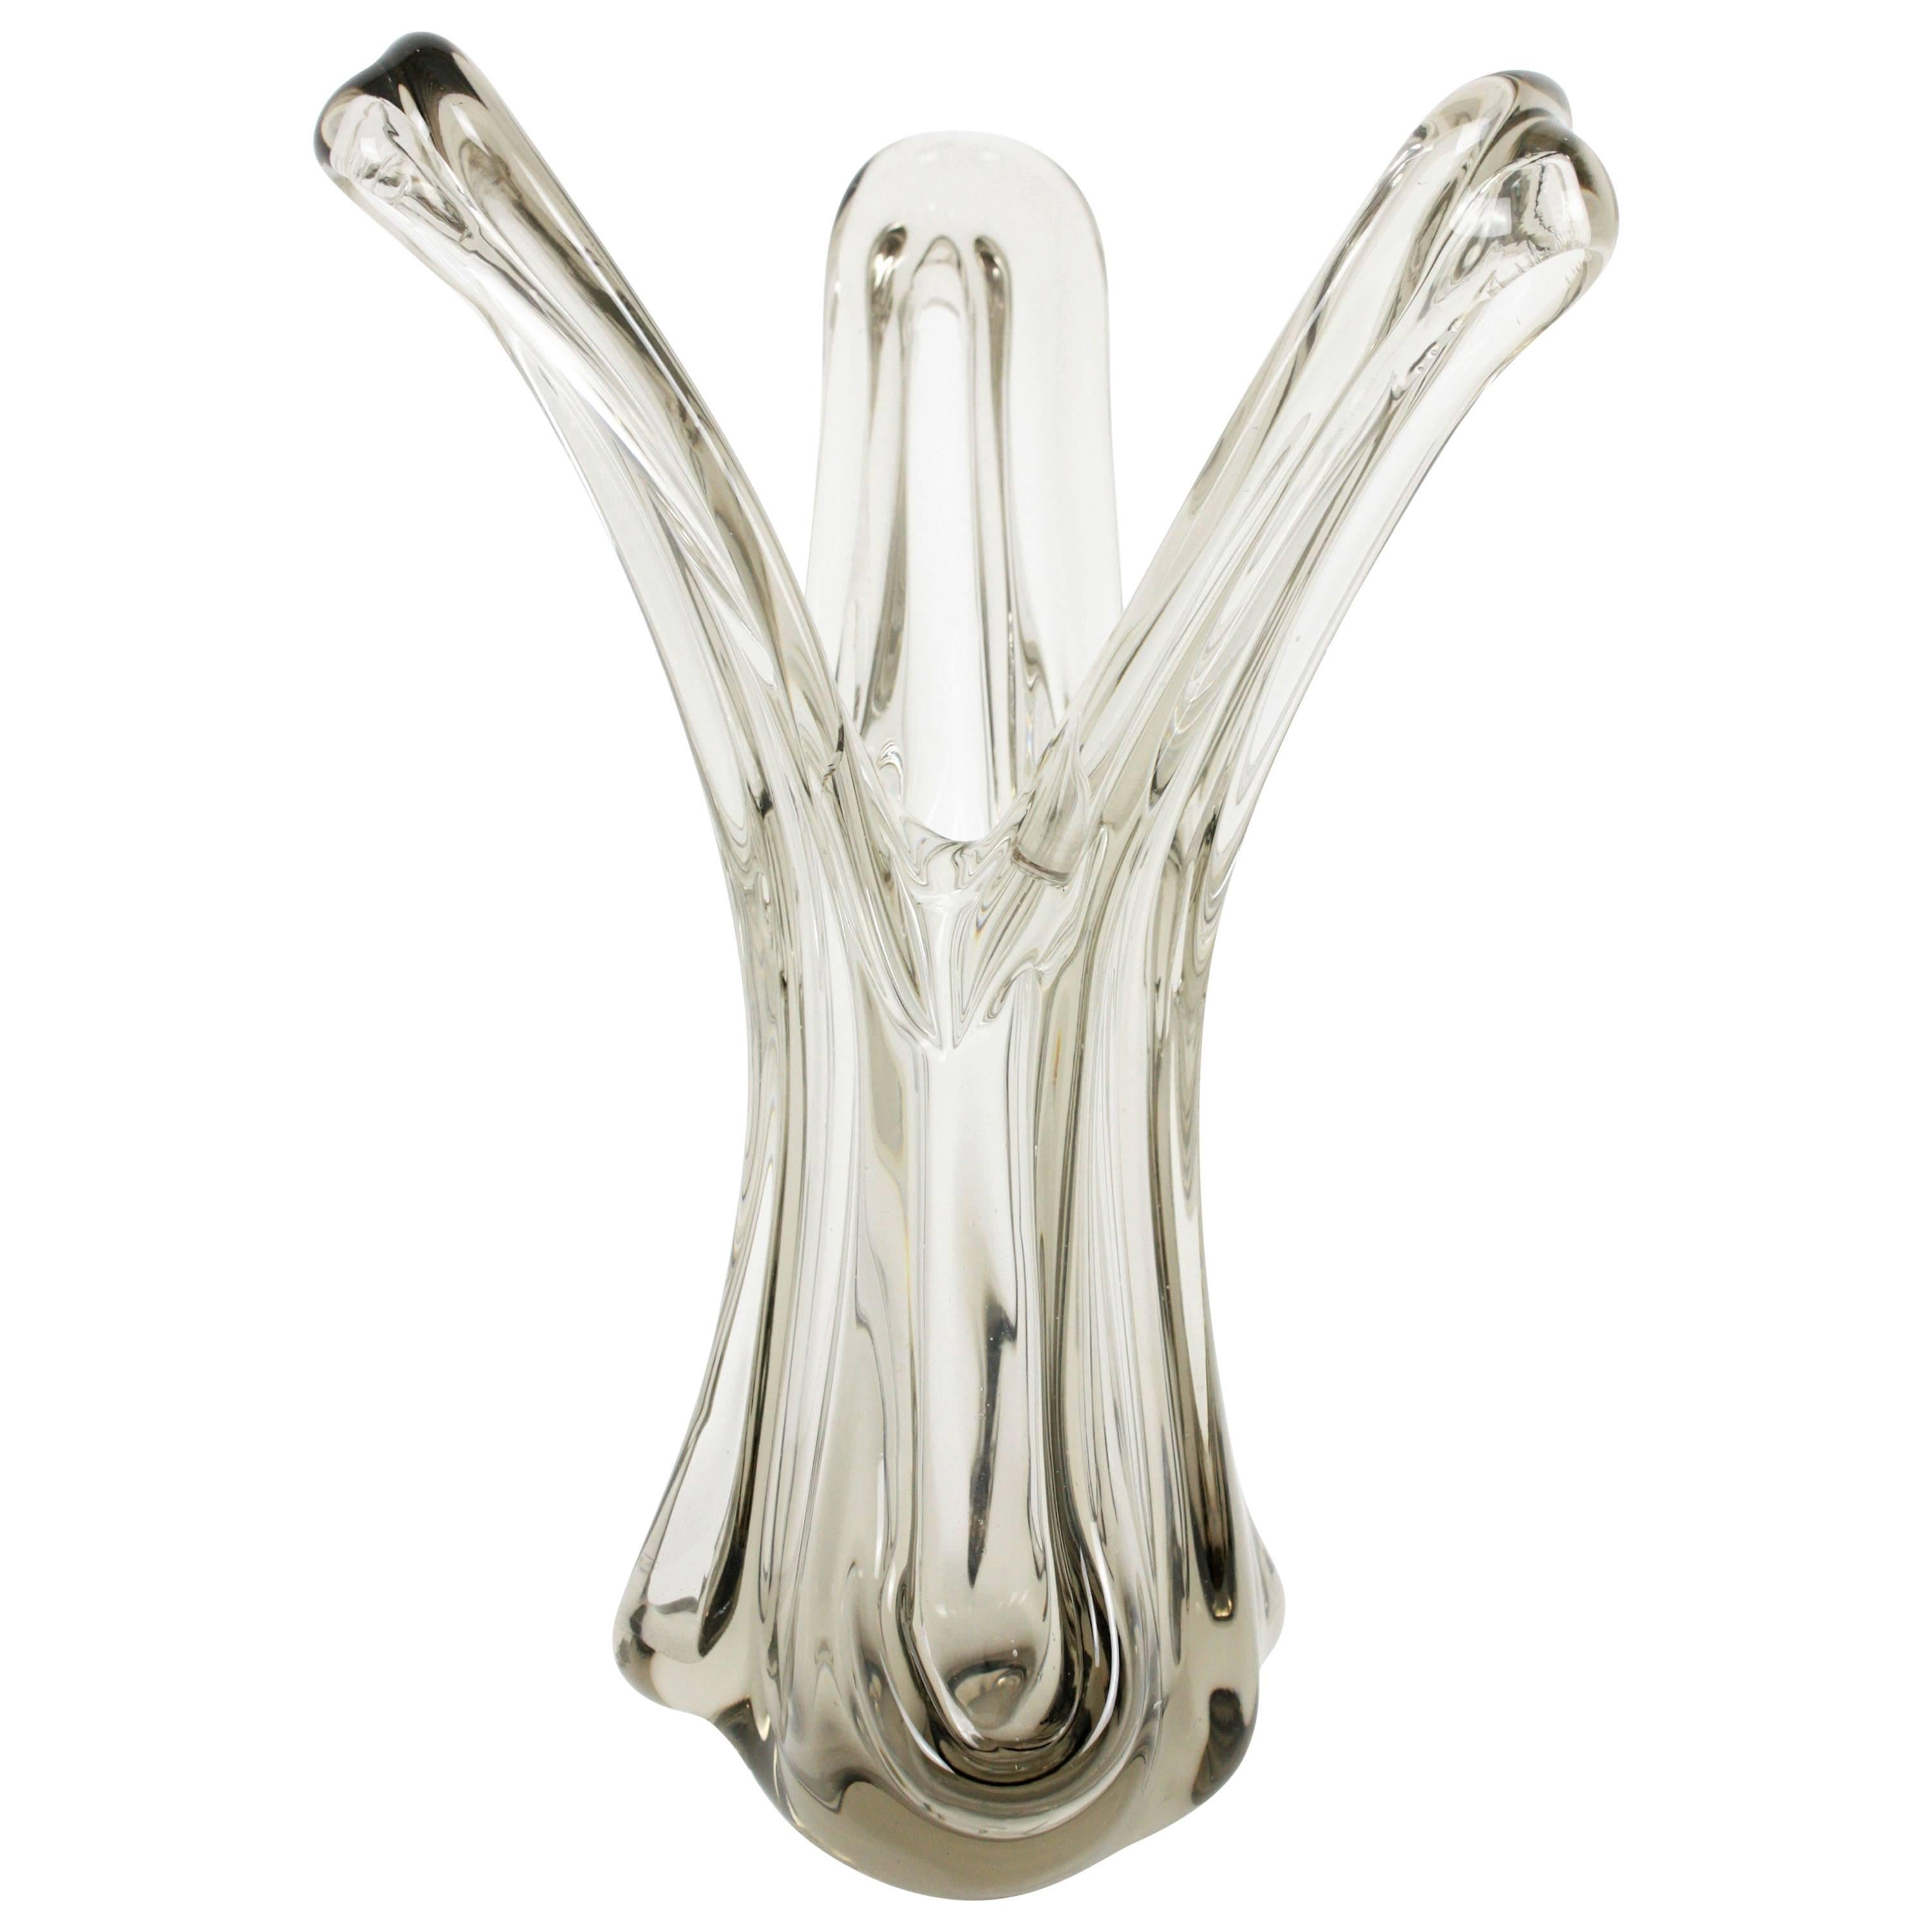 An sculptural handblown Italian Murano glass open vase in clear and smoked glass. Italy, 1960s.
Its organic design with sionuous shapes is highly decorative. 
Beautiful to be displayed as a decorative centerpiece vase or to place a bouquet of